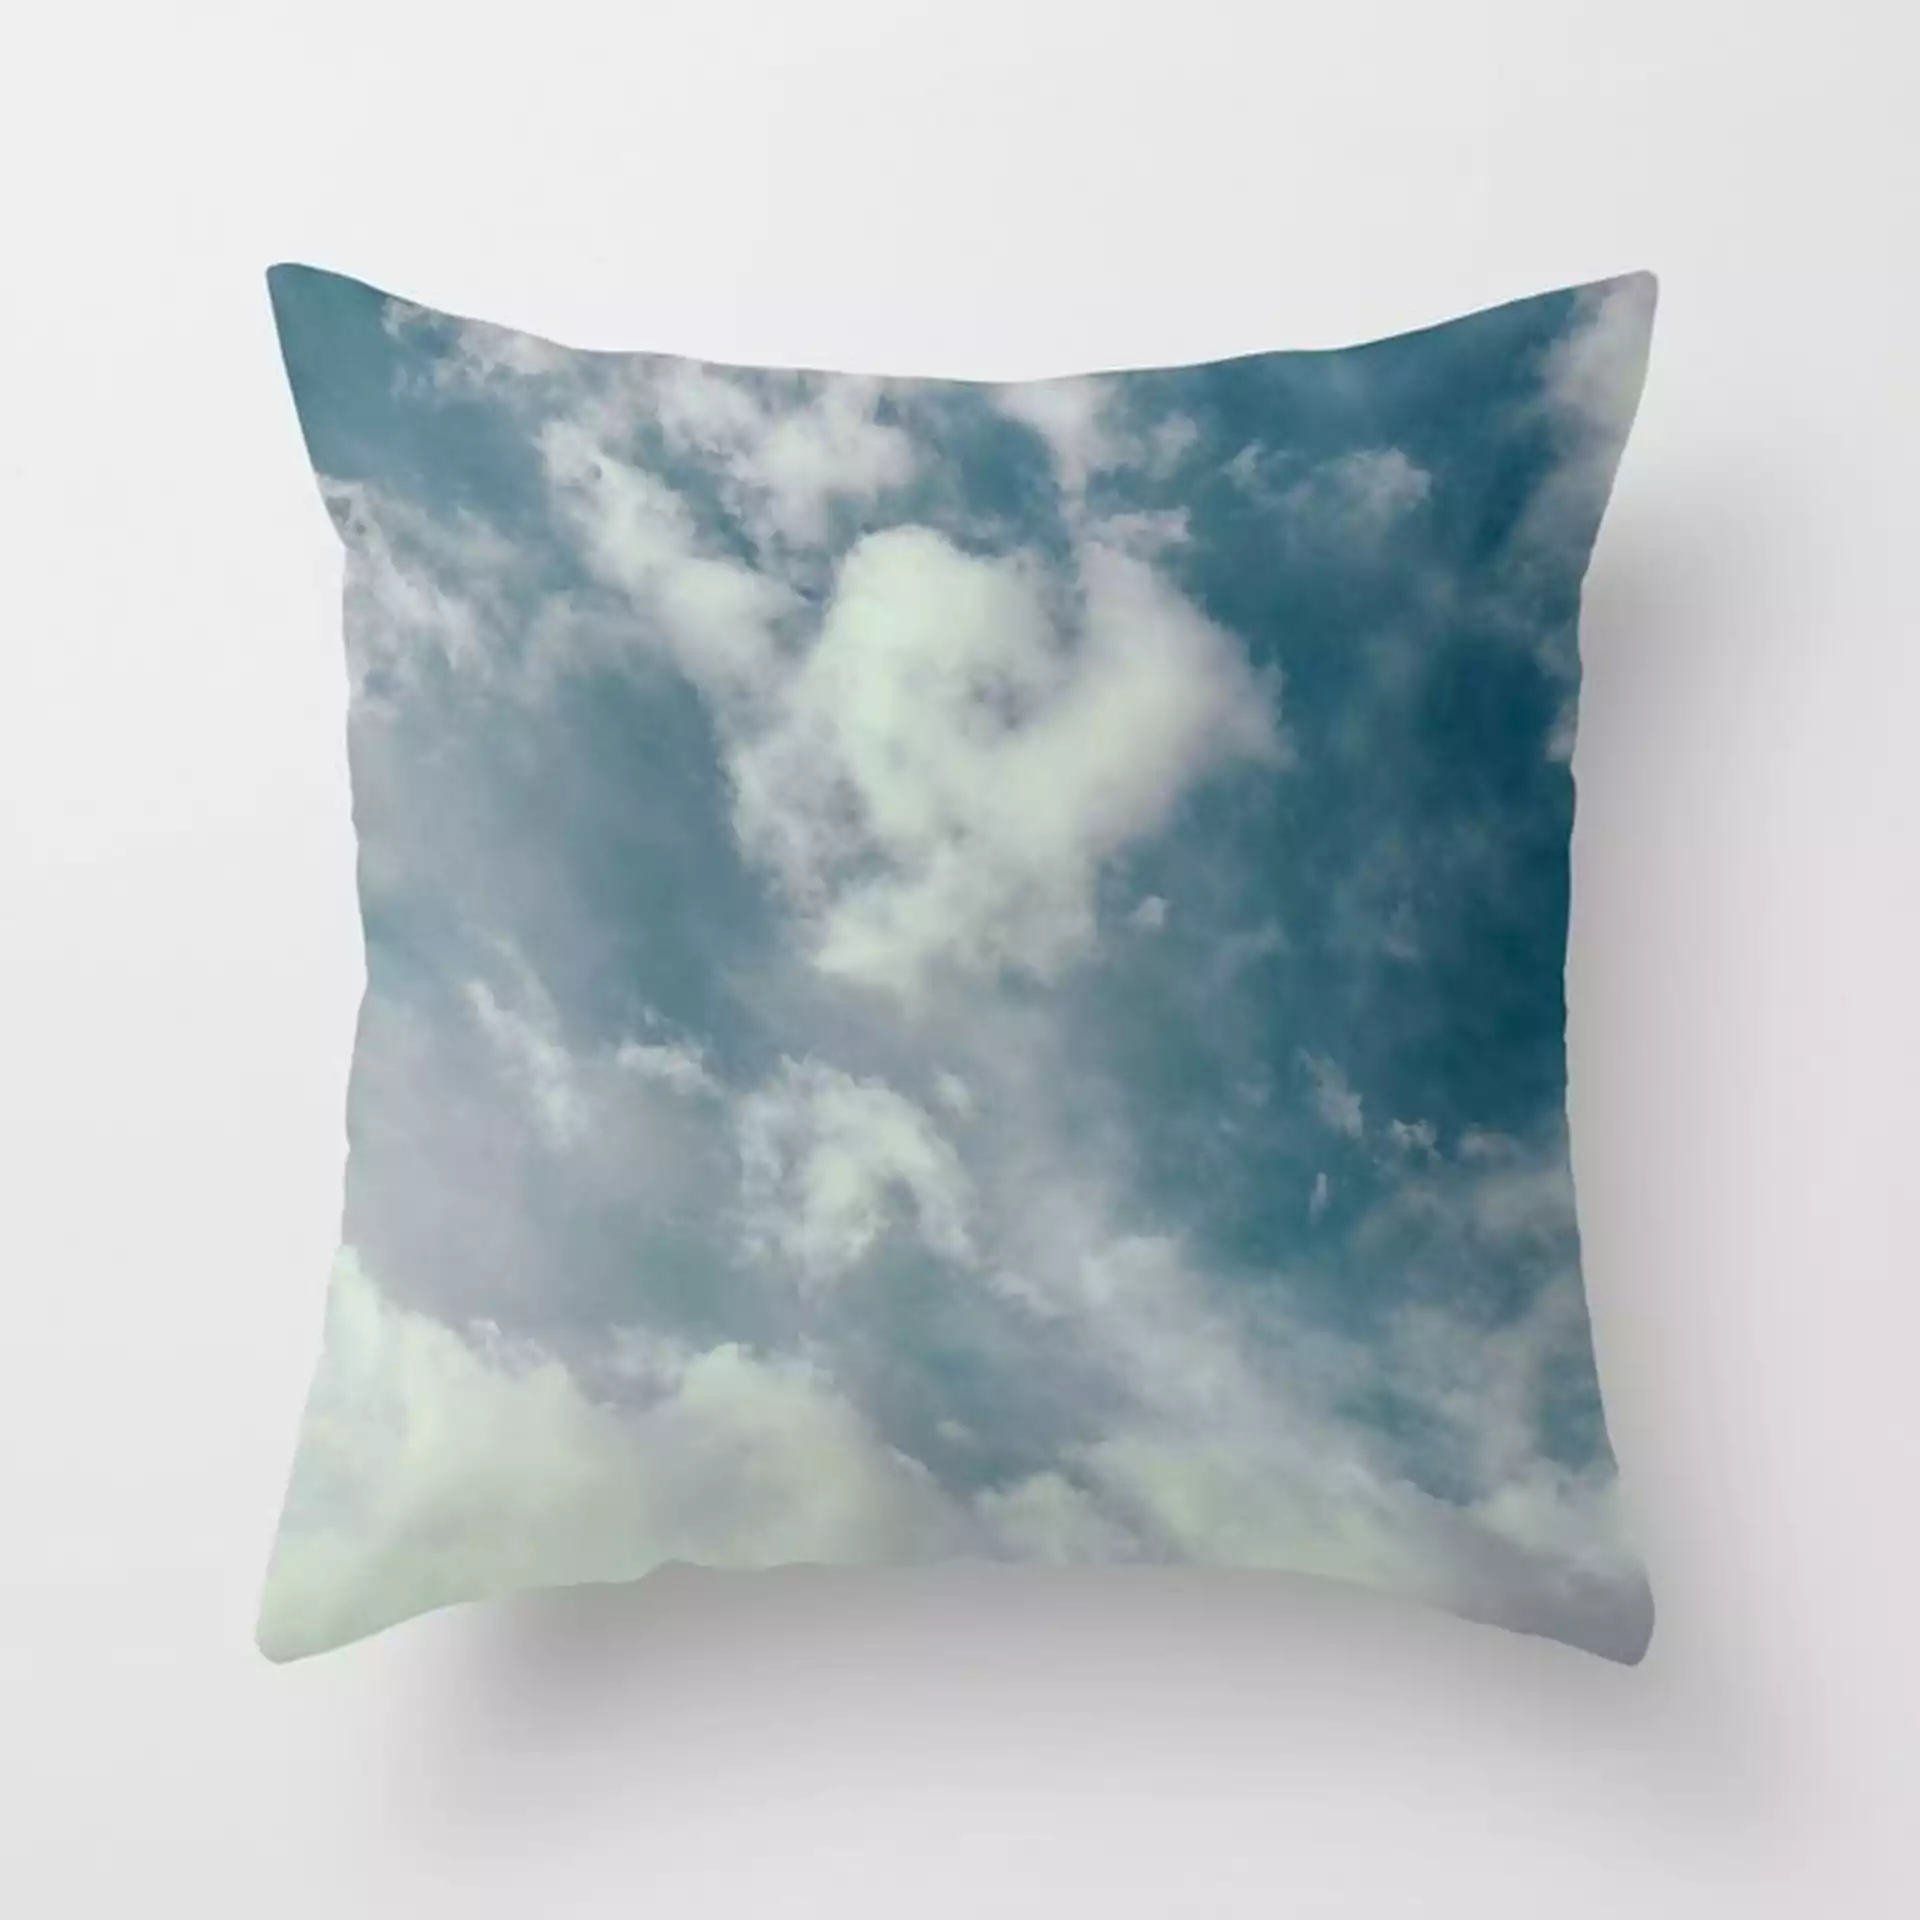 Soft Dreamy Cloudy Sky Couch Throw Pillow by Leah Flores - Cover (24" x 24") with pillow insert - Indoor Pillow